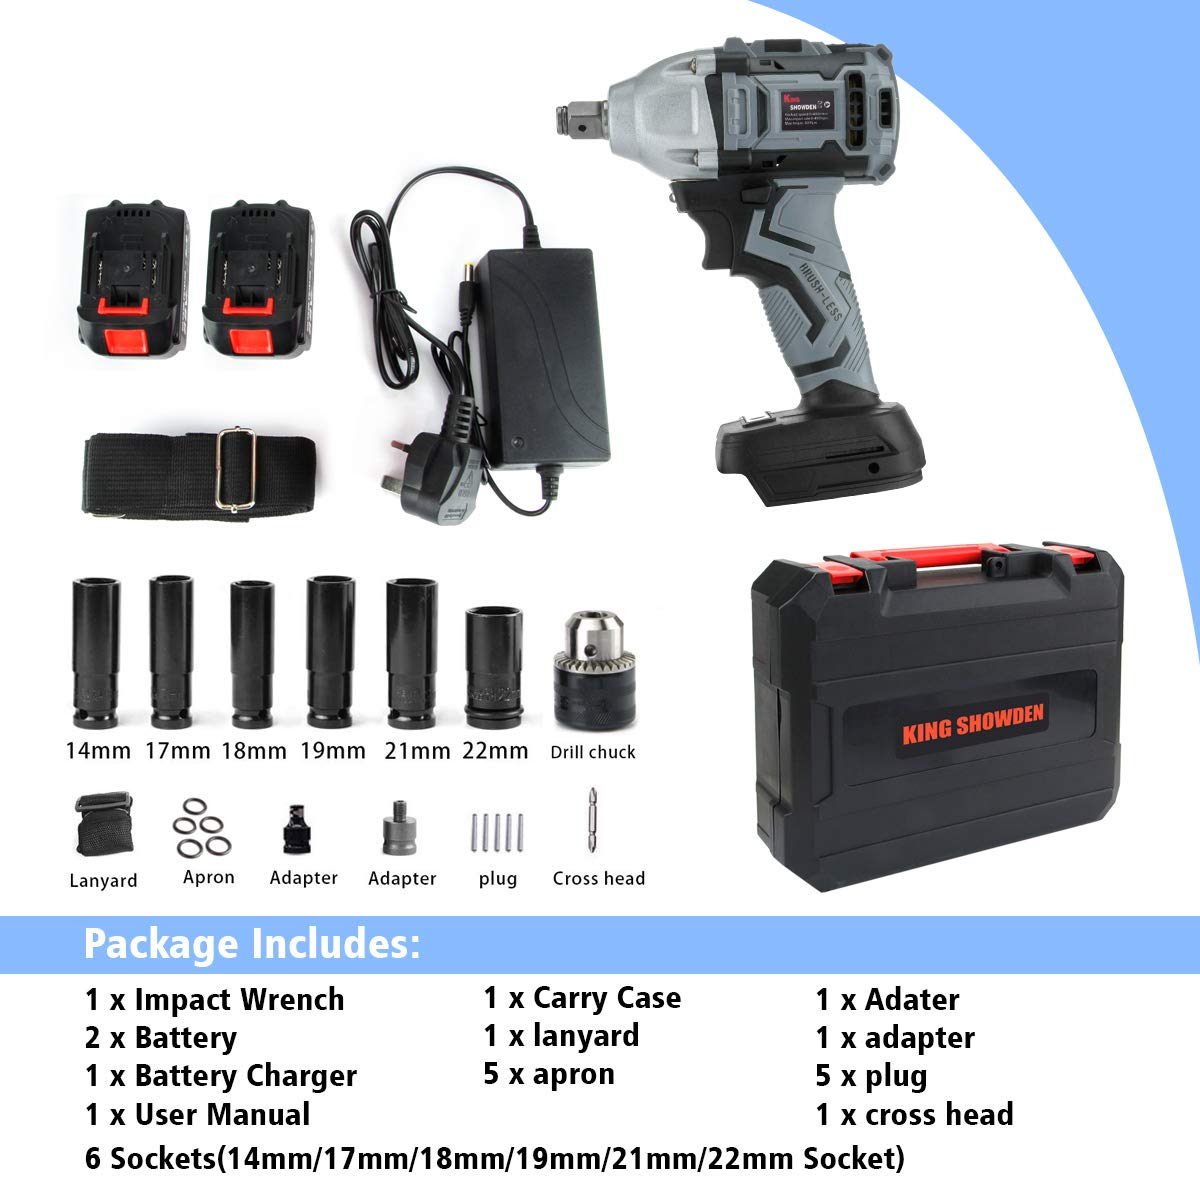 500N.M High Torque 5,000mAH Lithium Battery Dual Speed Automatic Power Tool,6 Impact Socket and Carry Case Impact Wrench with 2 Battery KINGSHOWDEN Cordless Impact Driver 18V 